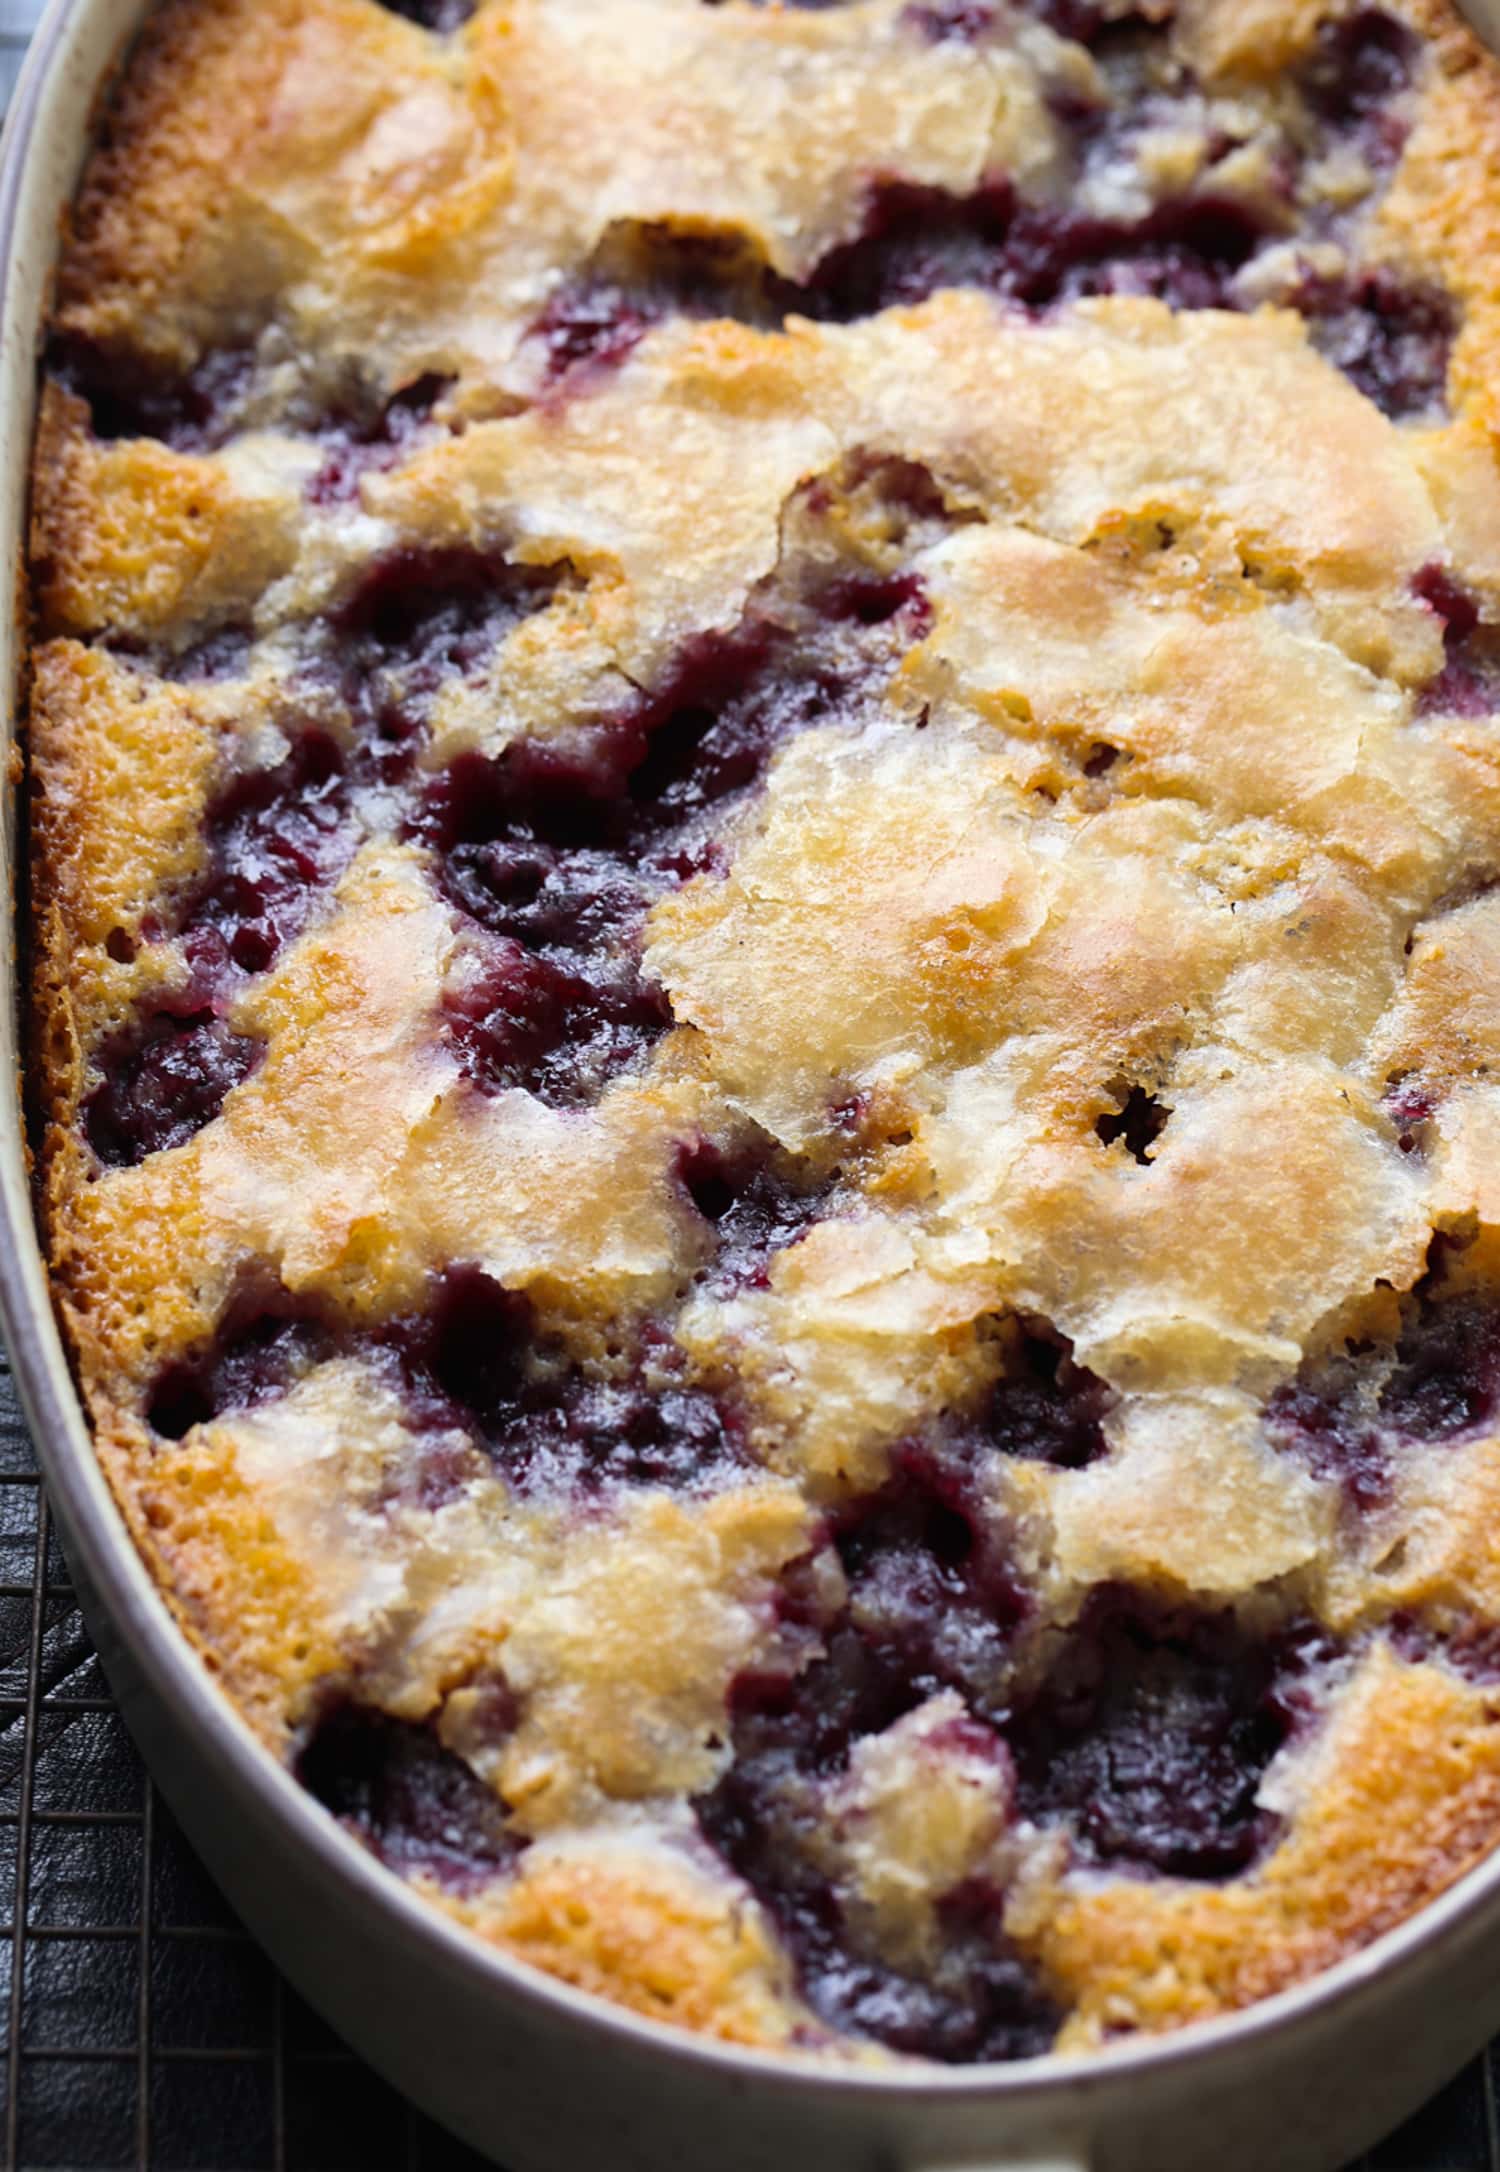 Blackberry cobbler in a baking dish fresh out of the oven